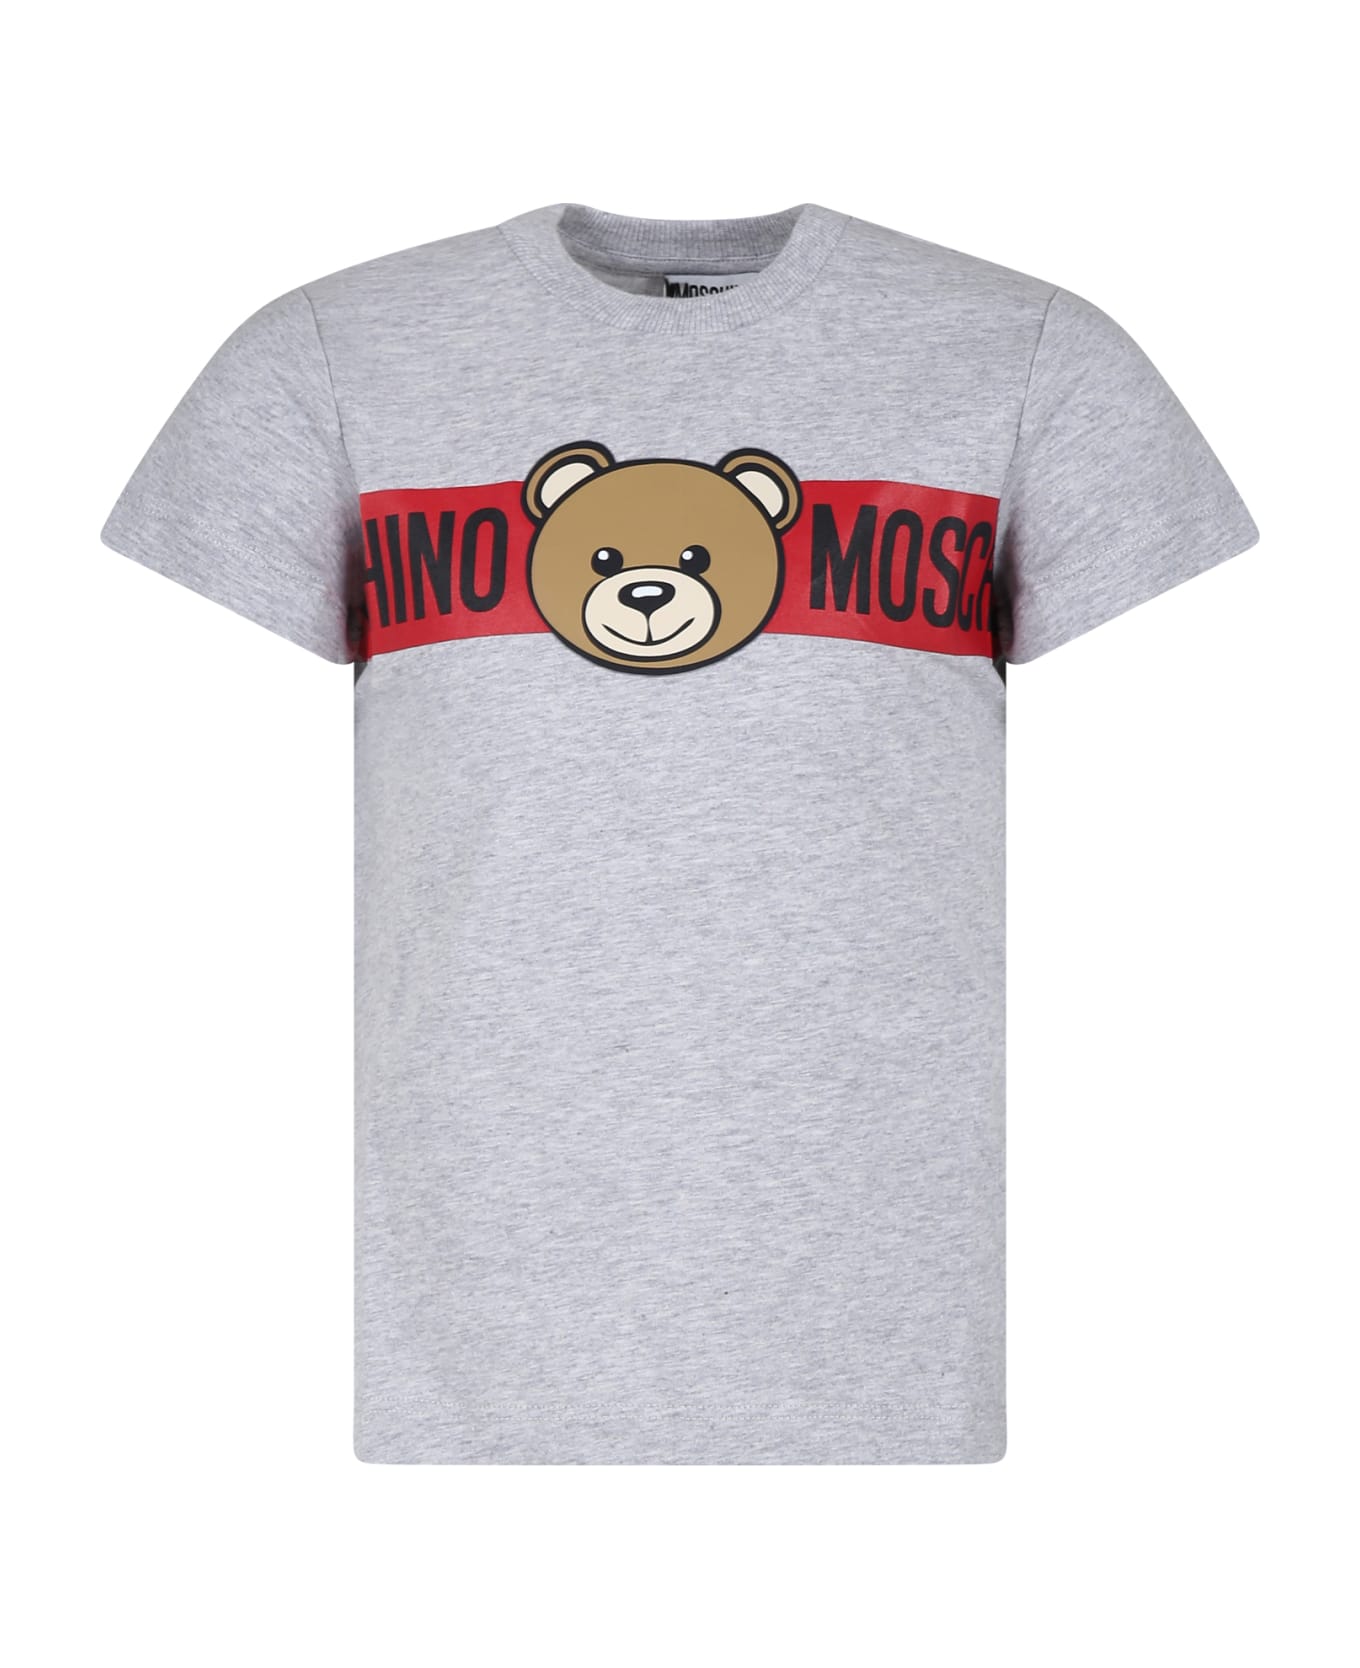 Moschino Grey T-shirt For Kids With Teddy Bear And Logo - Grey